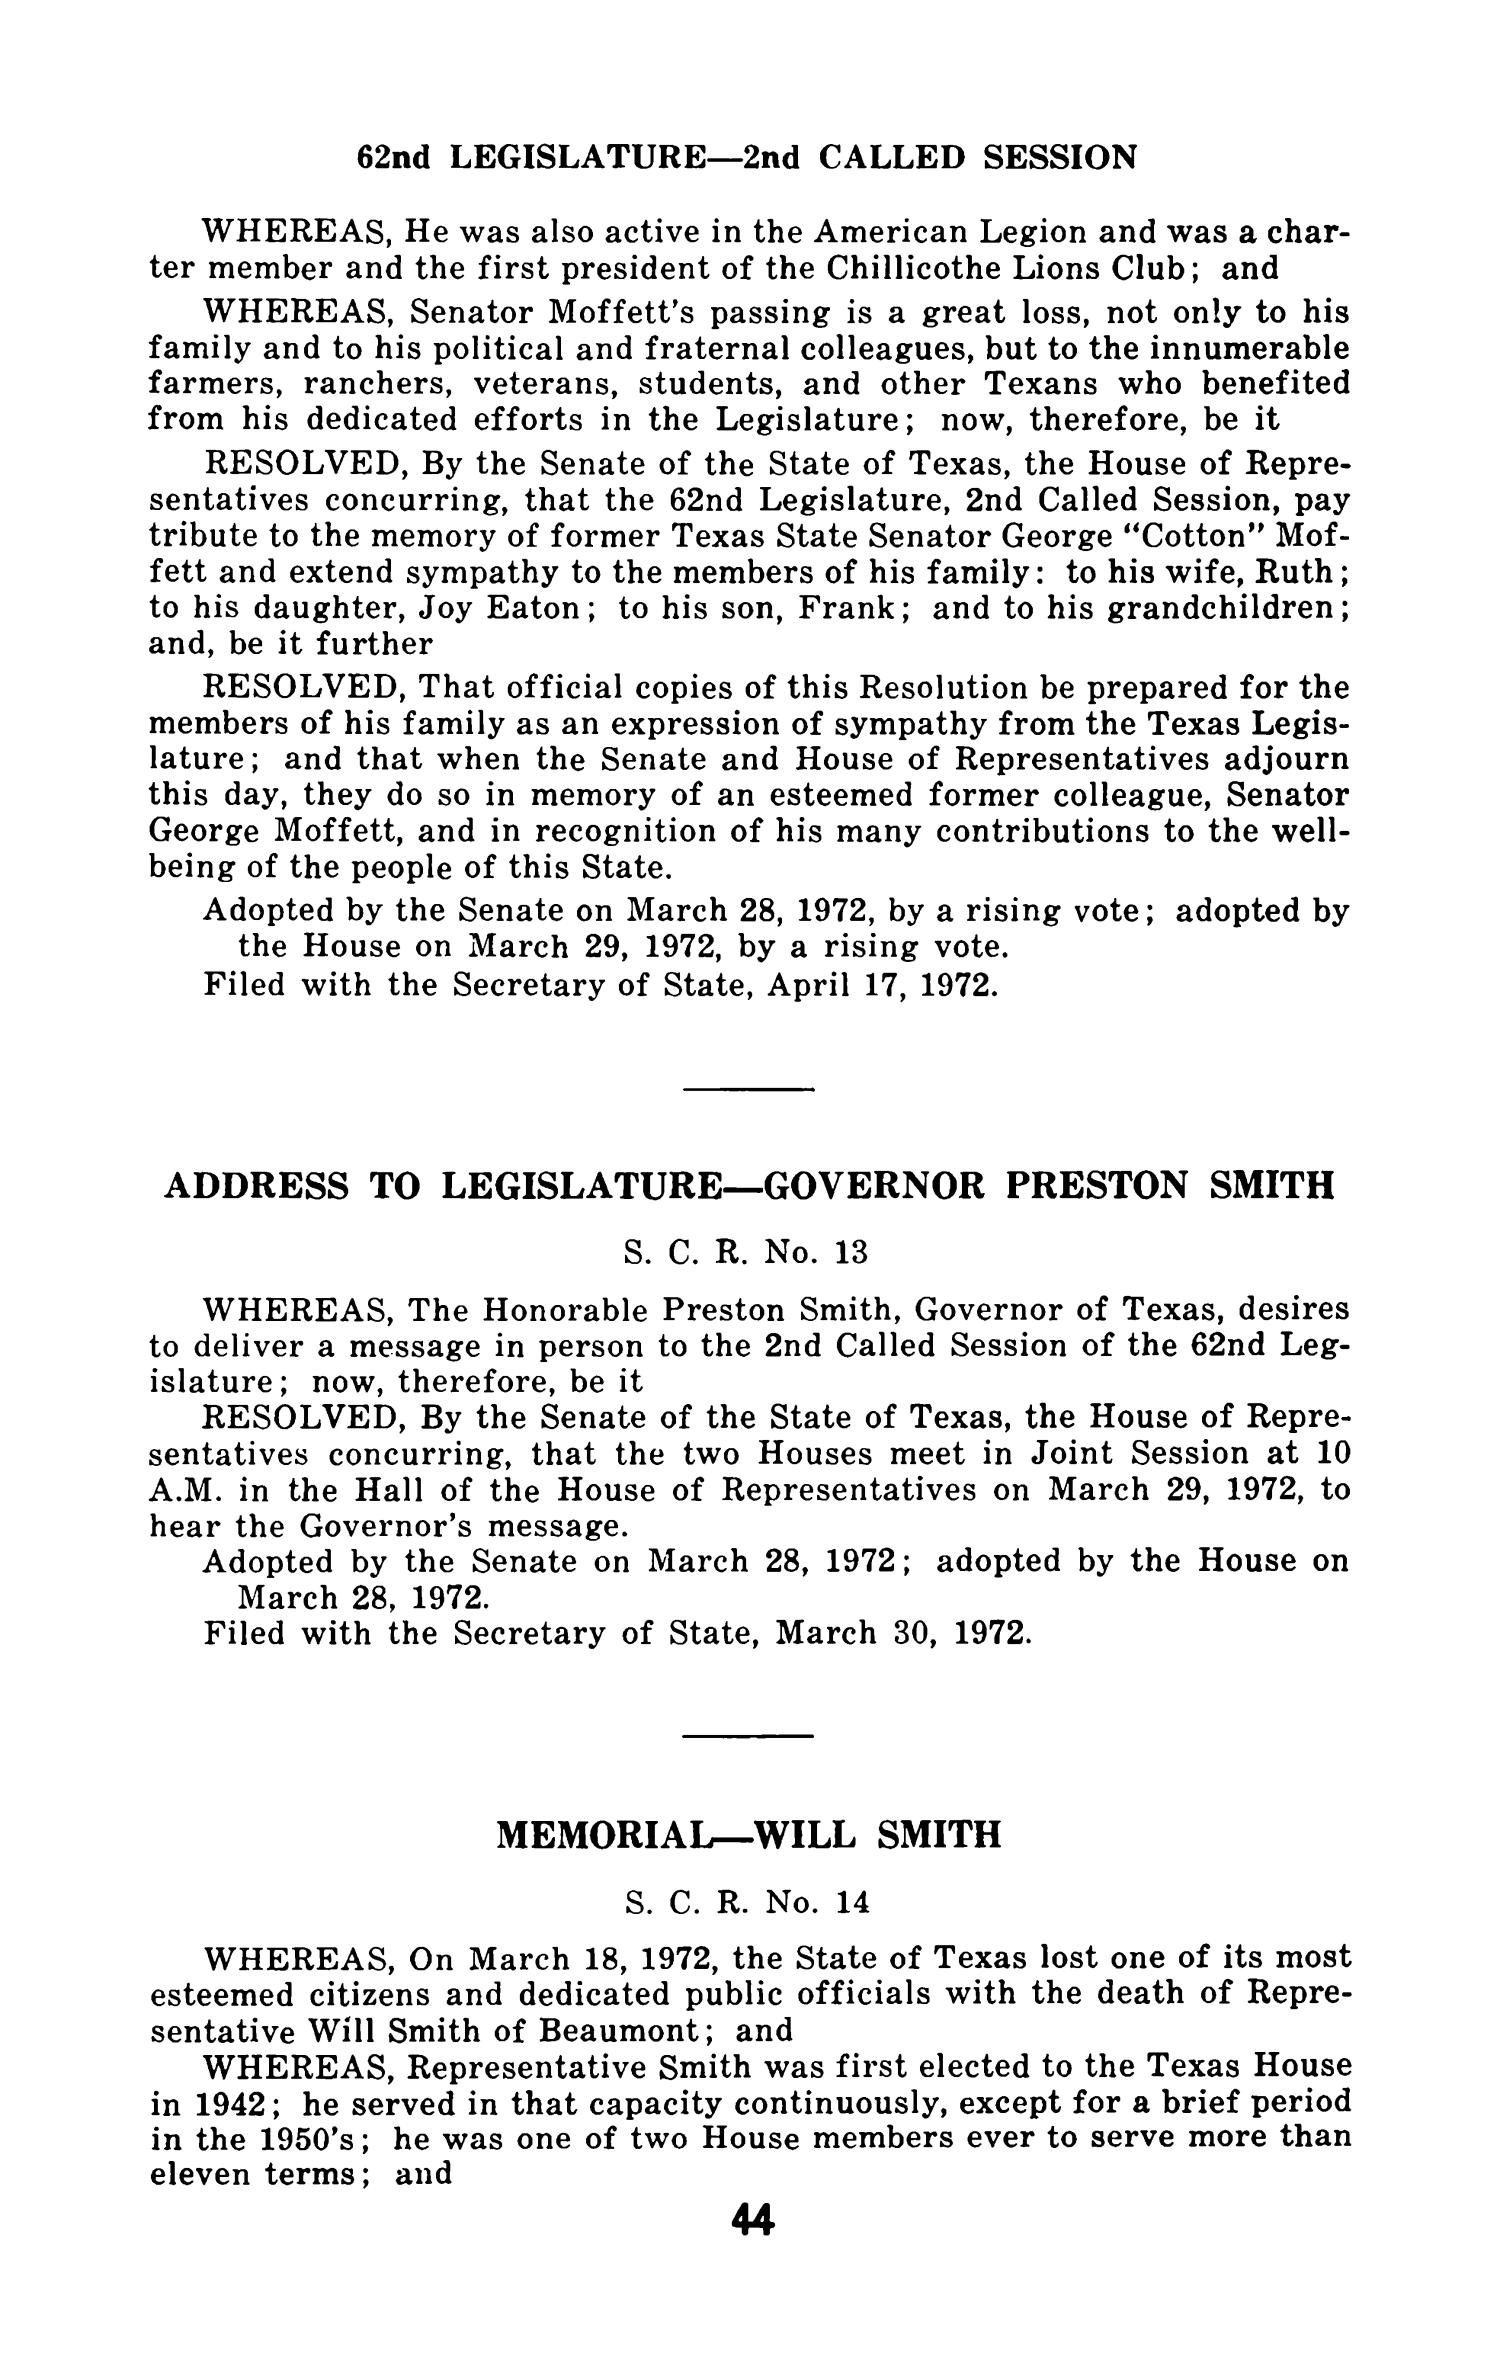 General and Special Laws of The State of Texas Passed By The Second, Third and Fourth Called Sessions of the Sixty-Second Legislature and the Regular Session of the Sixty-Third Legislature
                                                
                                                    44
                                                